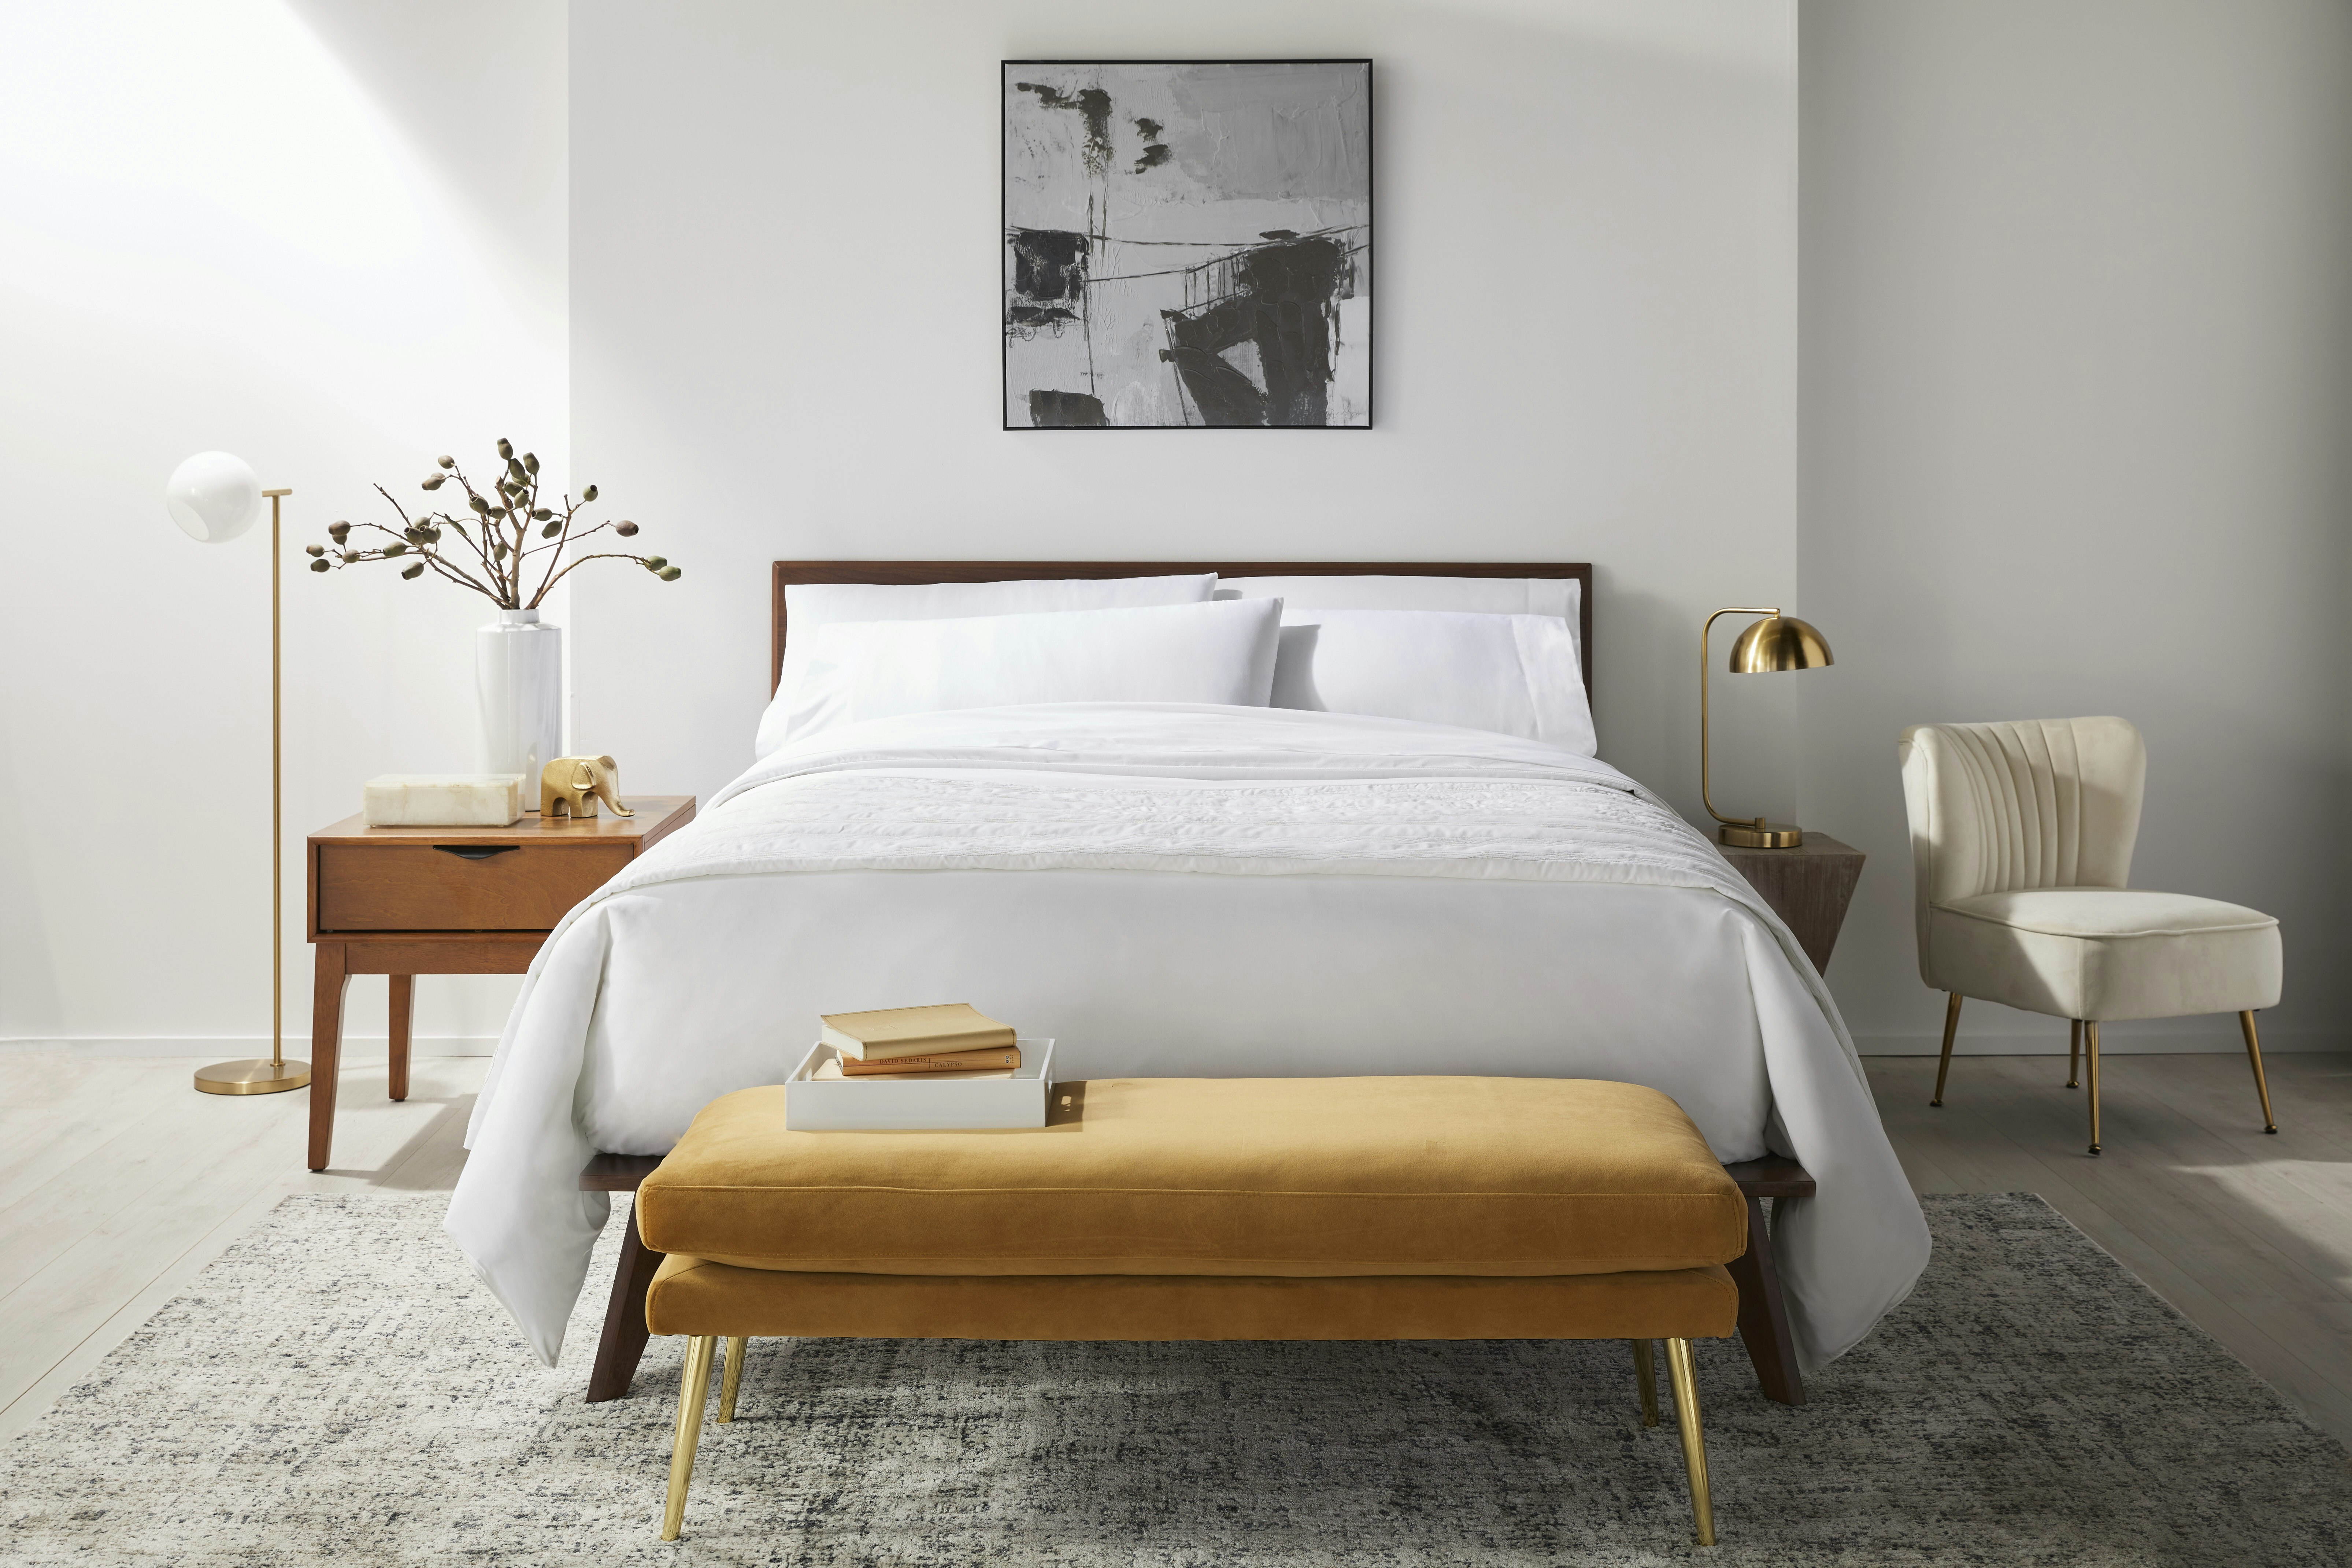 Bring Your Favorite Hotel Bedding Home - Dwell